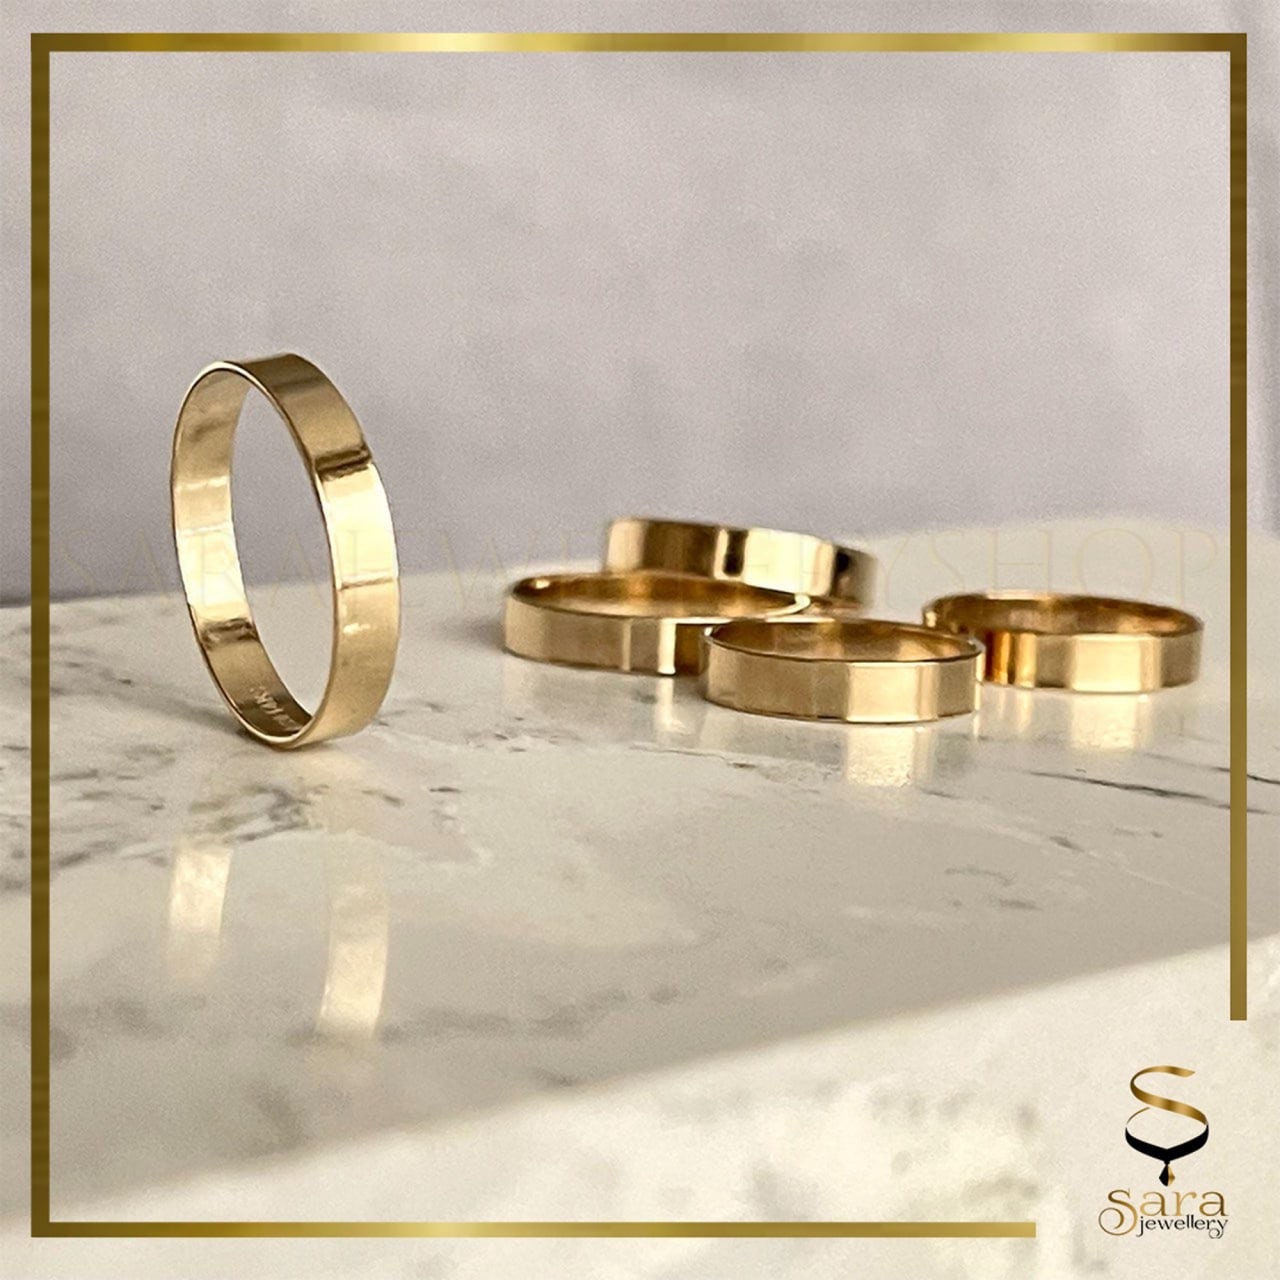 Tarnish Resistant 14k Gold Filled Thick Band Ring, Gold Band Ring, Flat Stacking Ring, Simple Gold Band Ring, Cigar Band, Ring Size5,6,7,8,9 - sjewellery|sara jewellery shop toronto